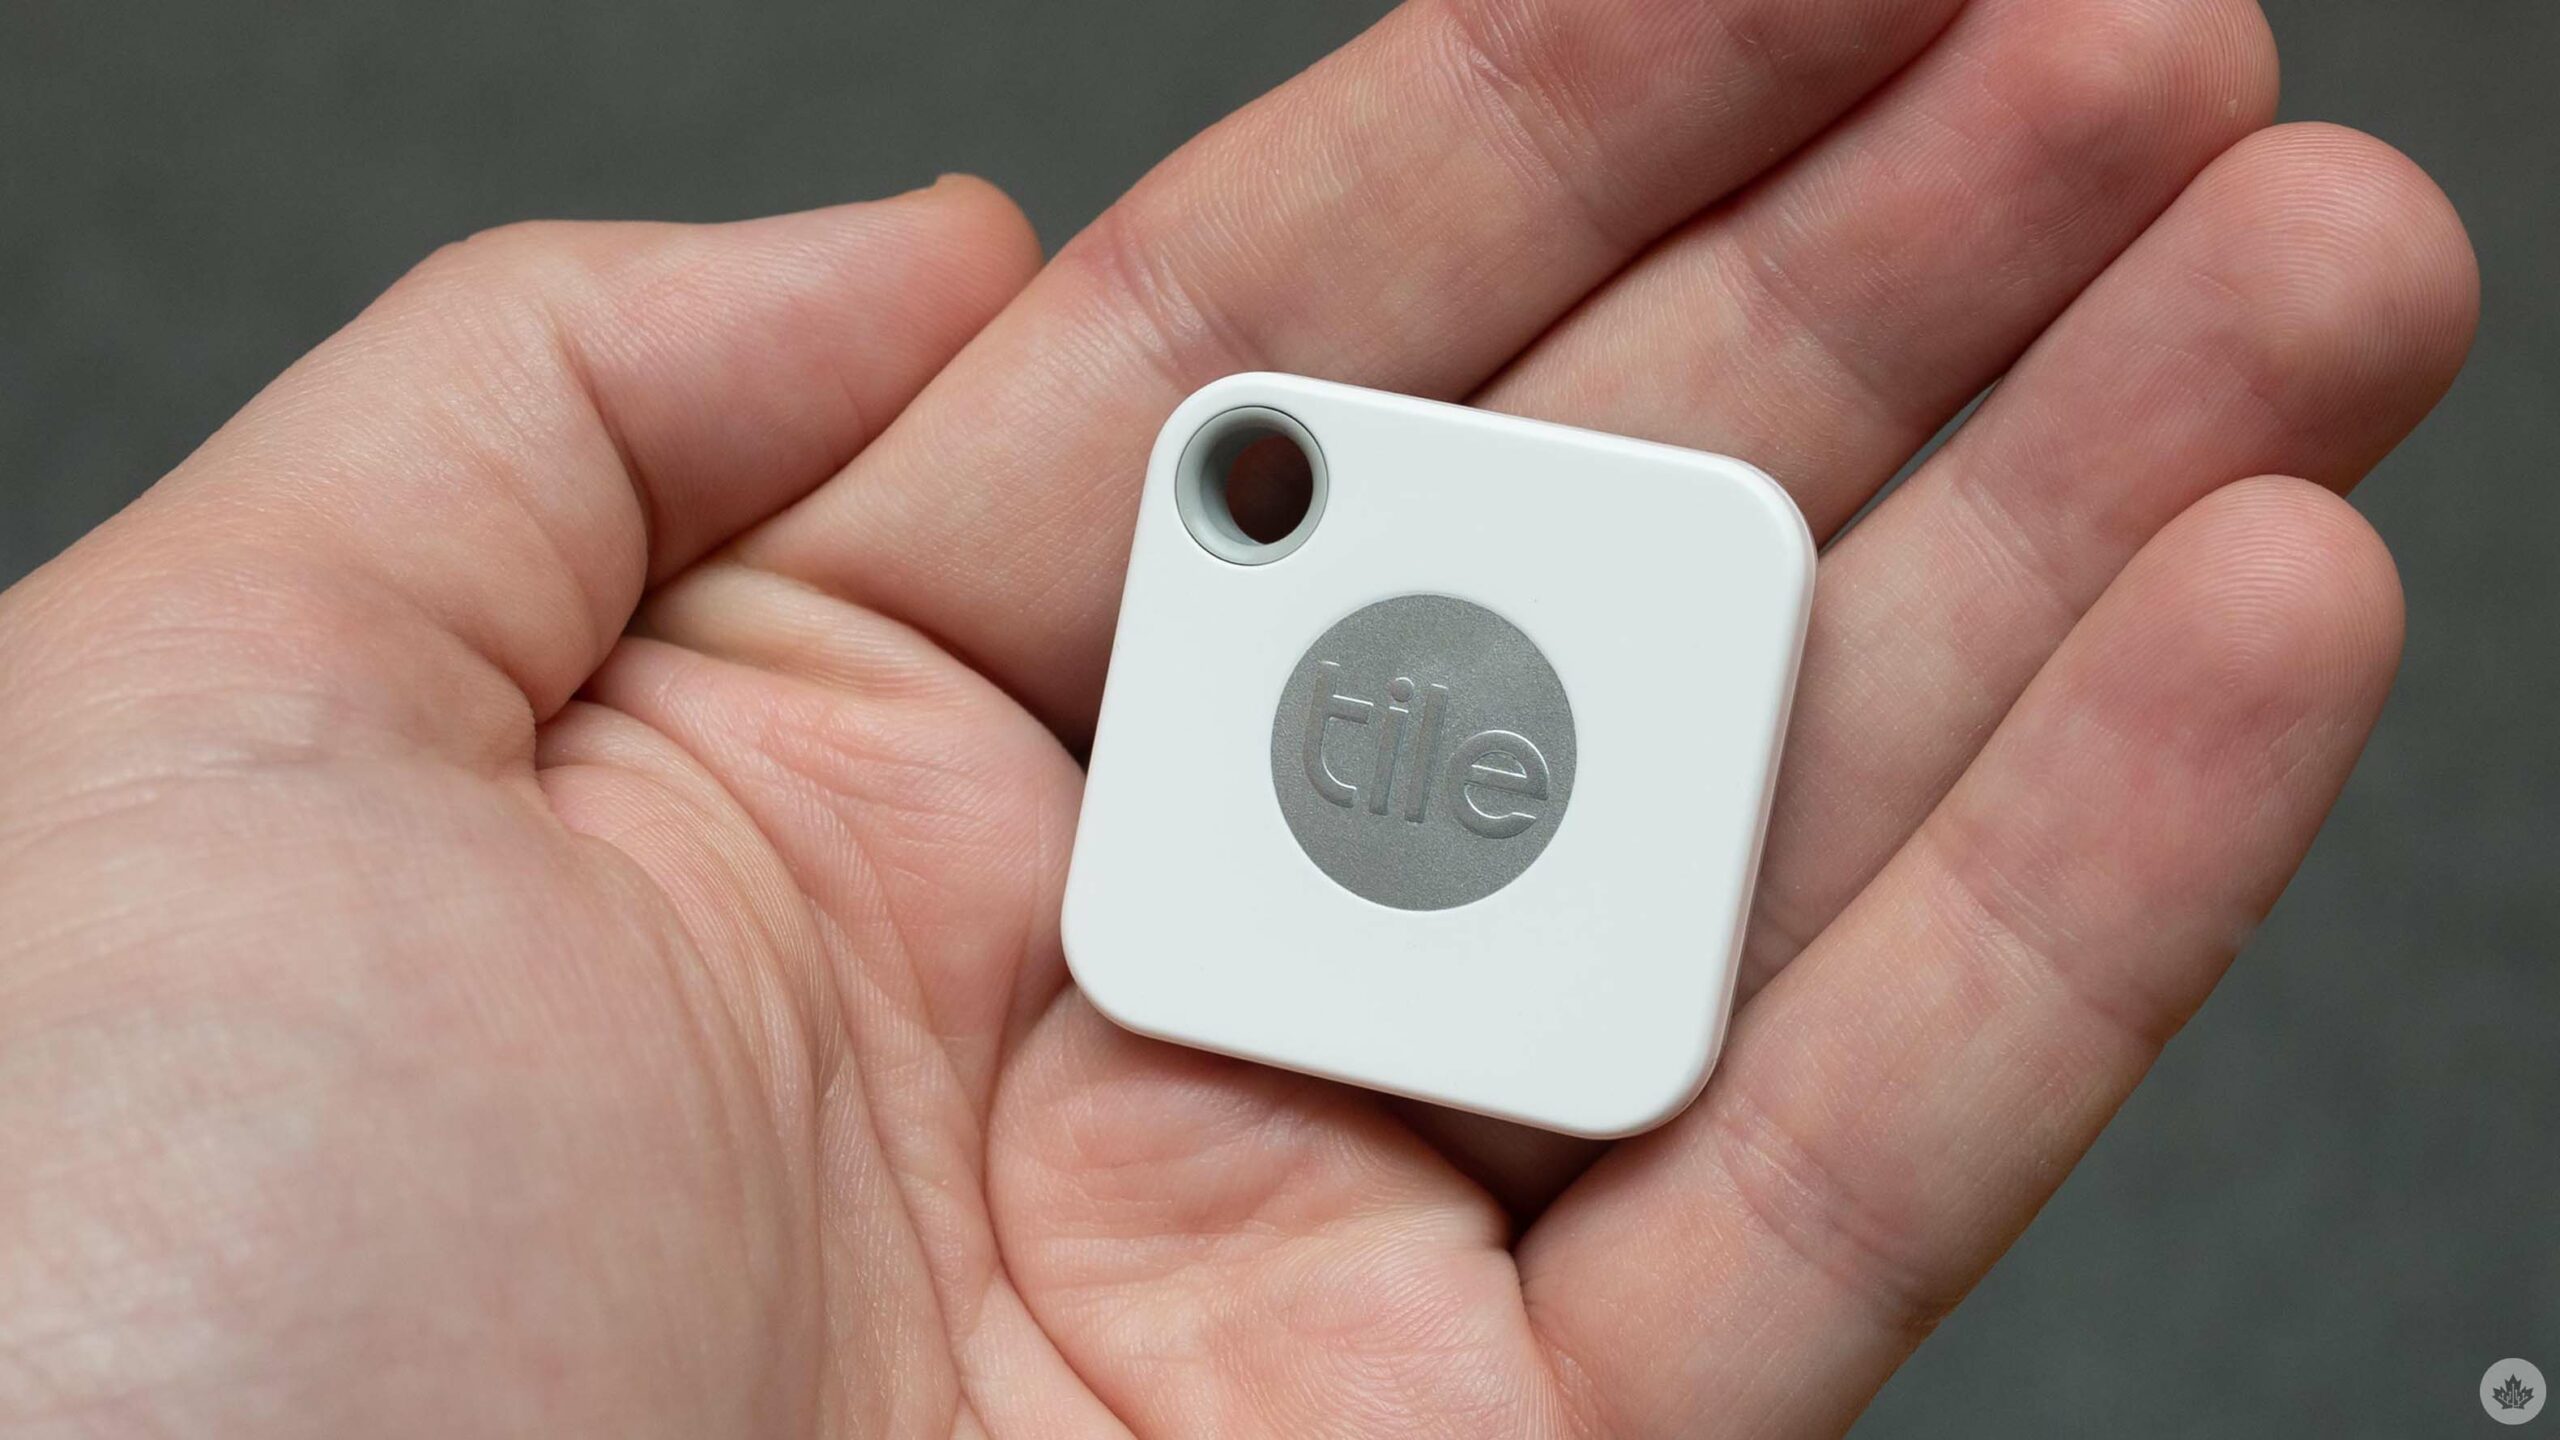 Tile adds ‘Scan and Secure’ feature so users can check for trackers